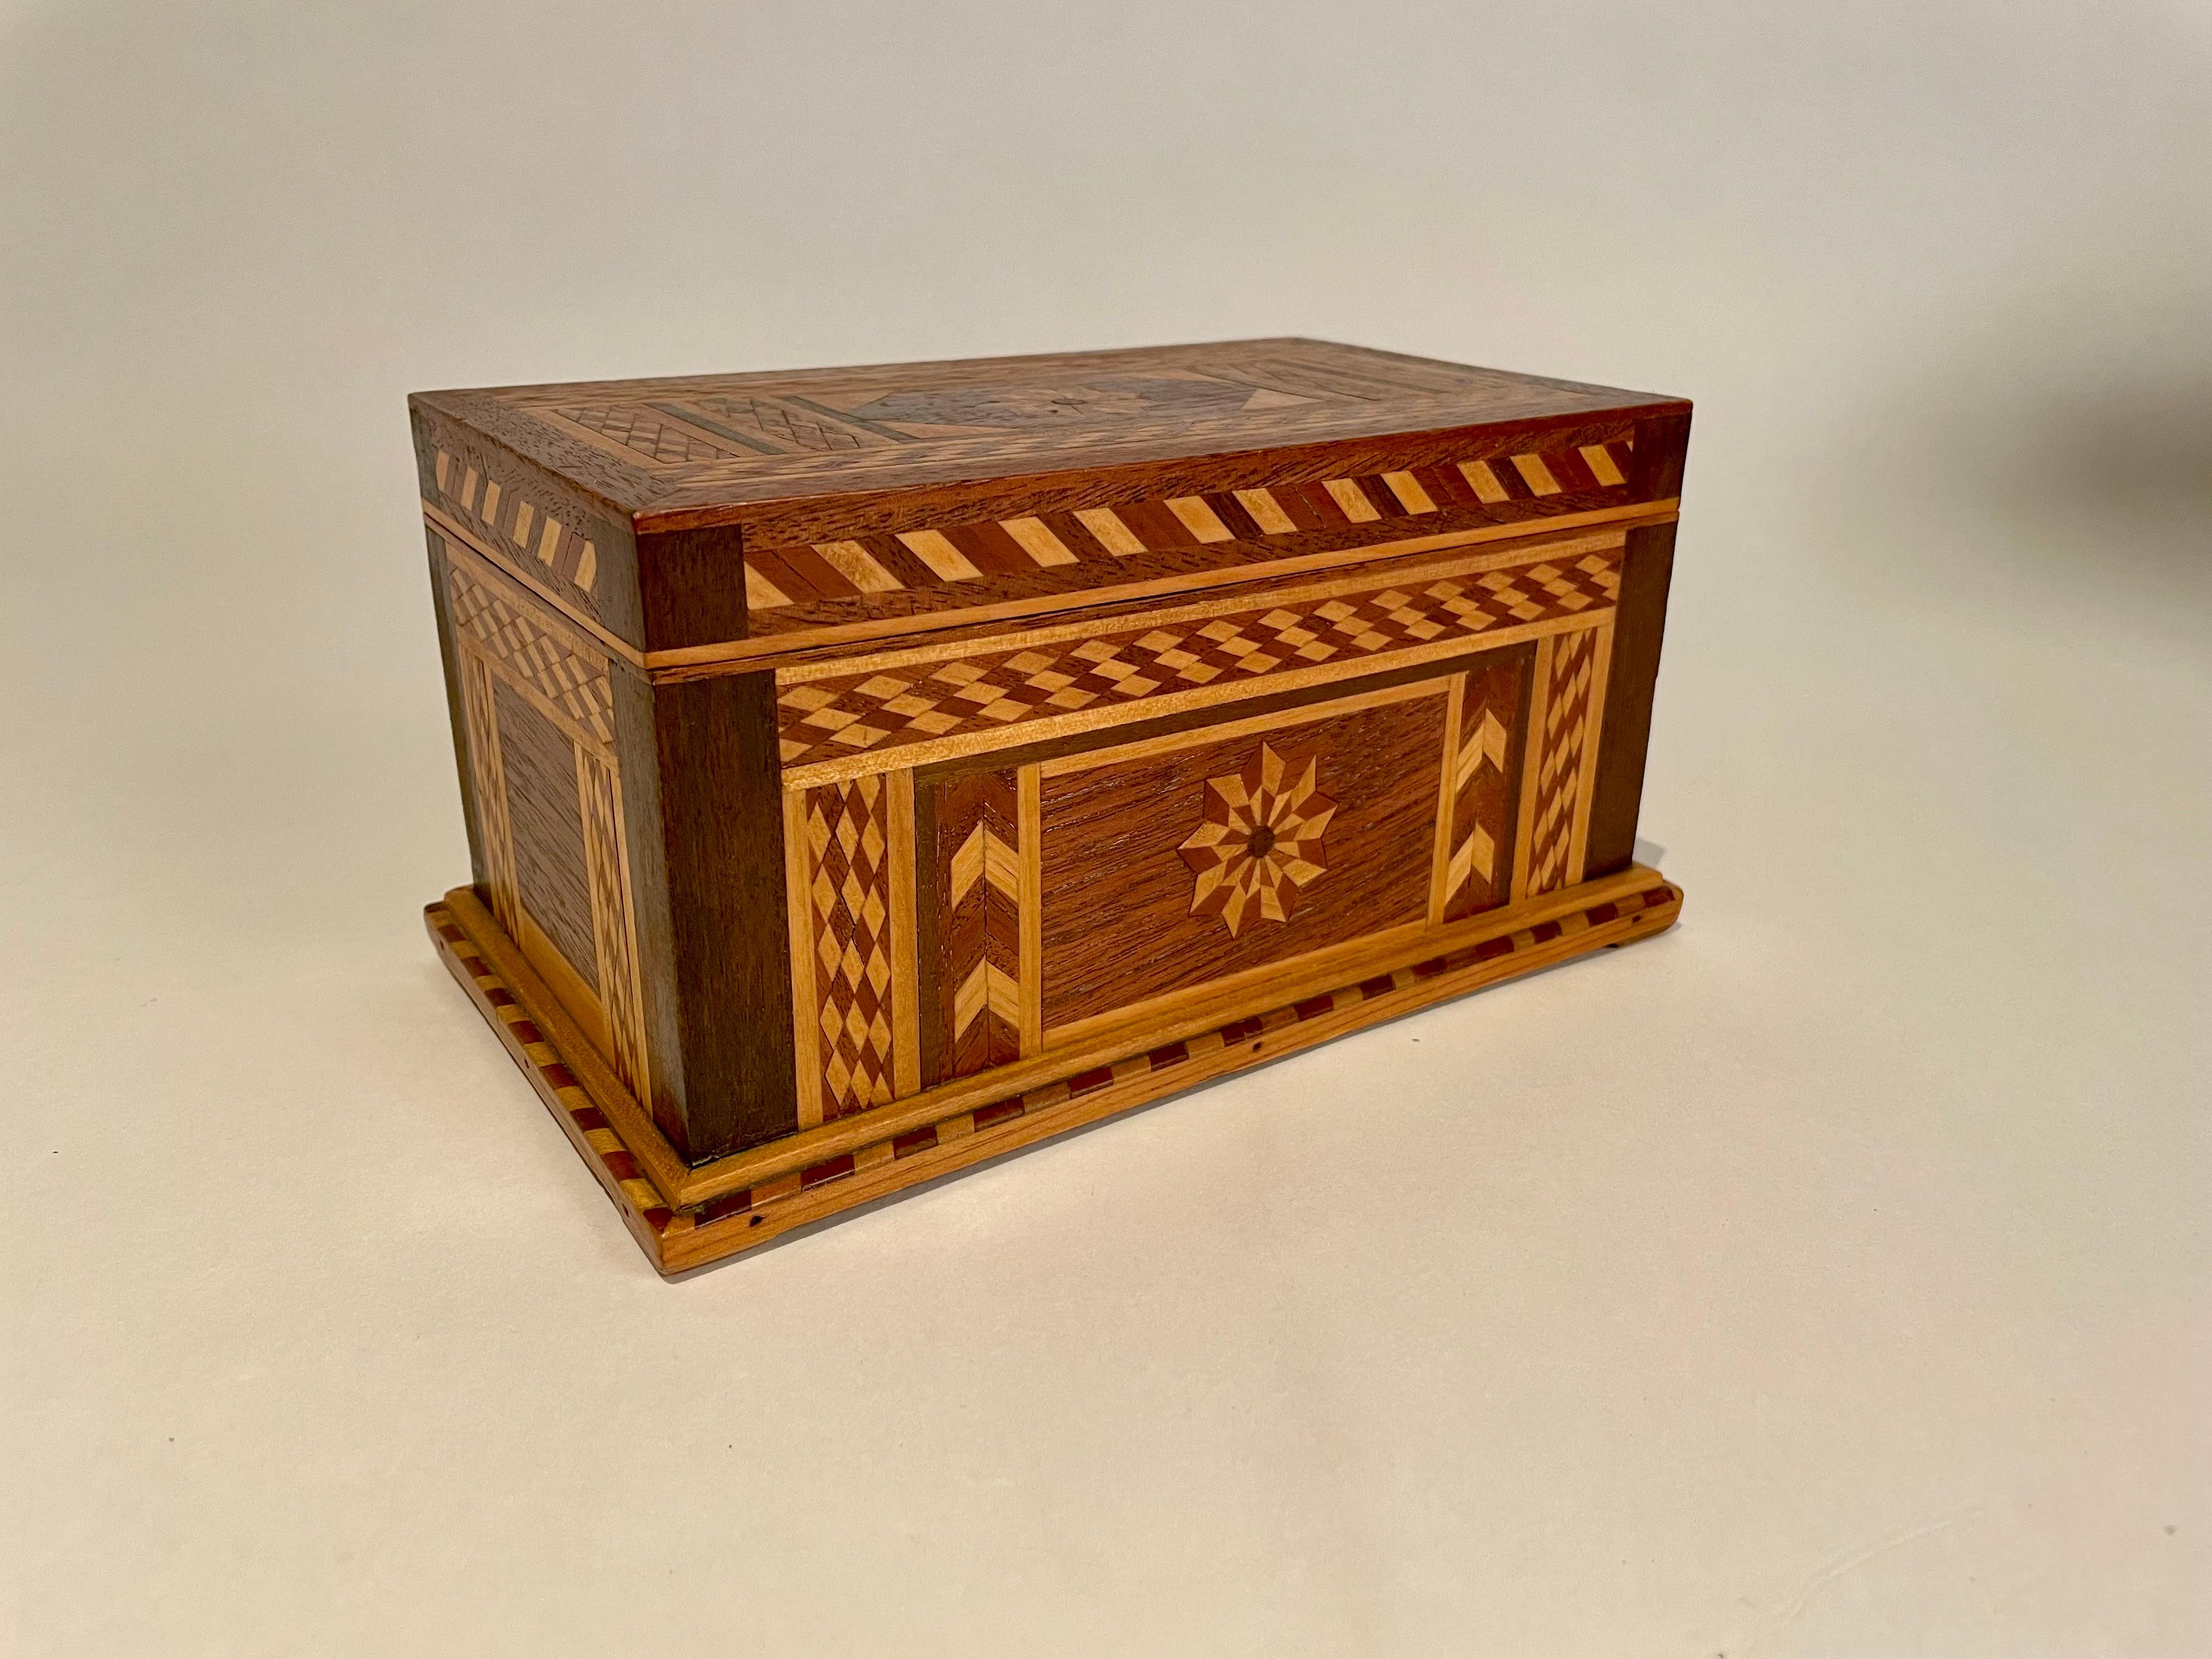 A very handsome hand crafted walnut box with wonderful geometric inlay of various fruit woods. The top and front with inlaid geometric starbursts. The rectangular desk top box resting on an integral plinth. Lined with deep purple velvet. Very fine